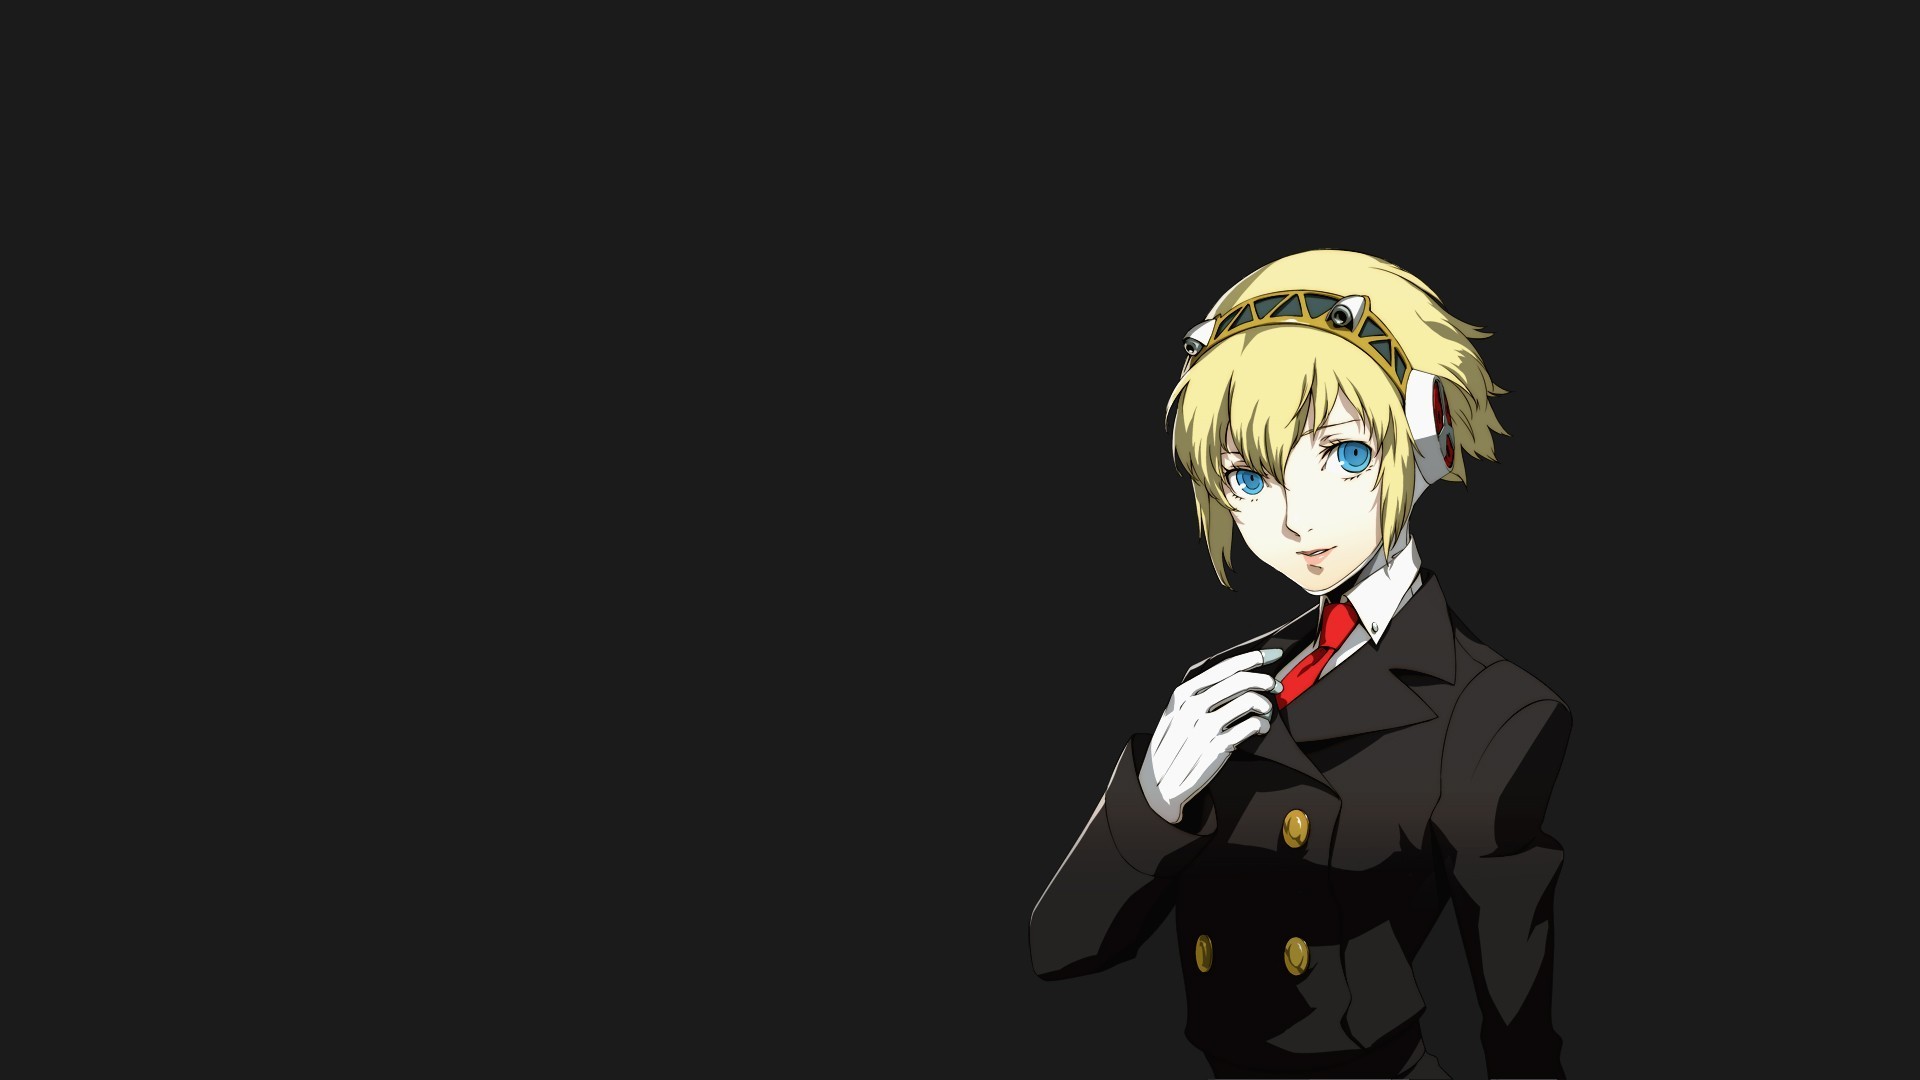 Persona Series Persona 4 Arena Aigis Simple Background Anime Tie Blonde Anime Girls Video Games Pers 1920x1080